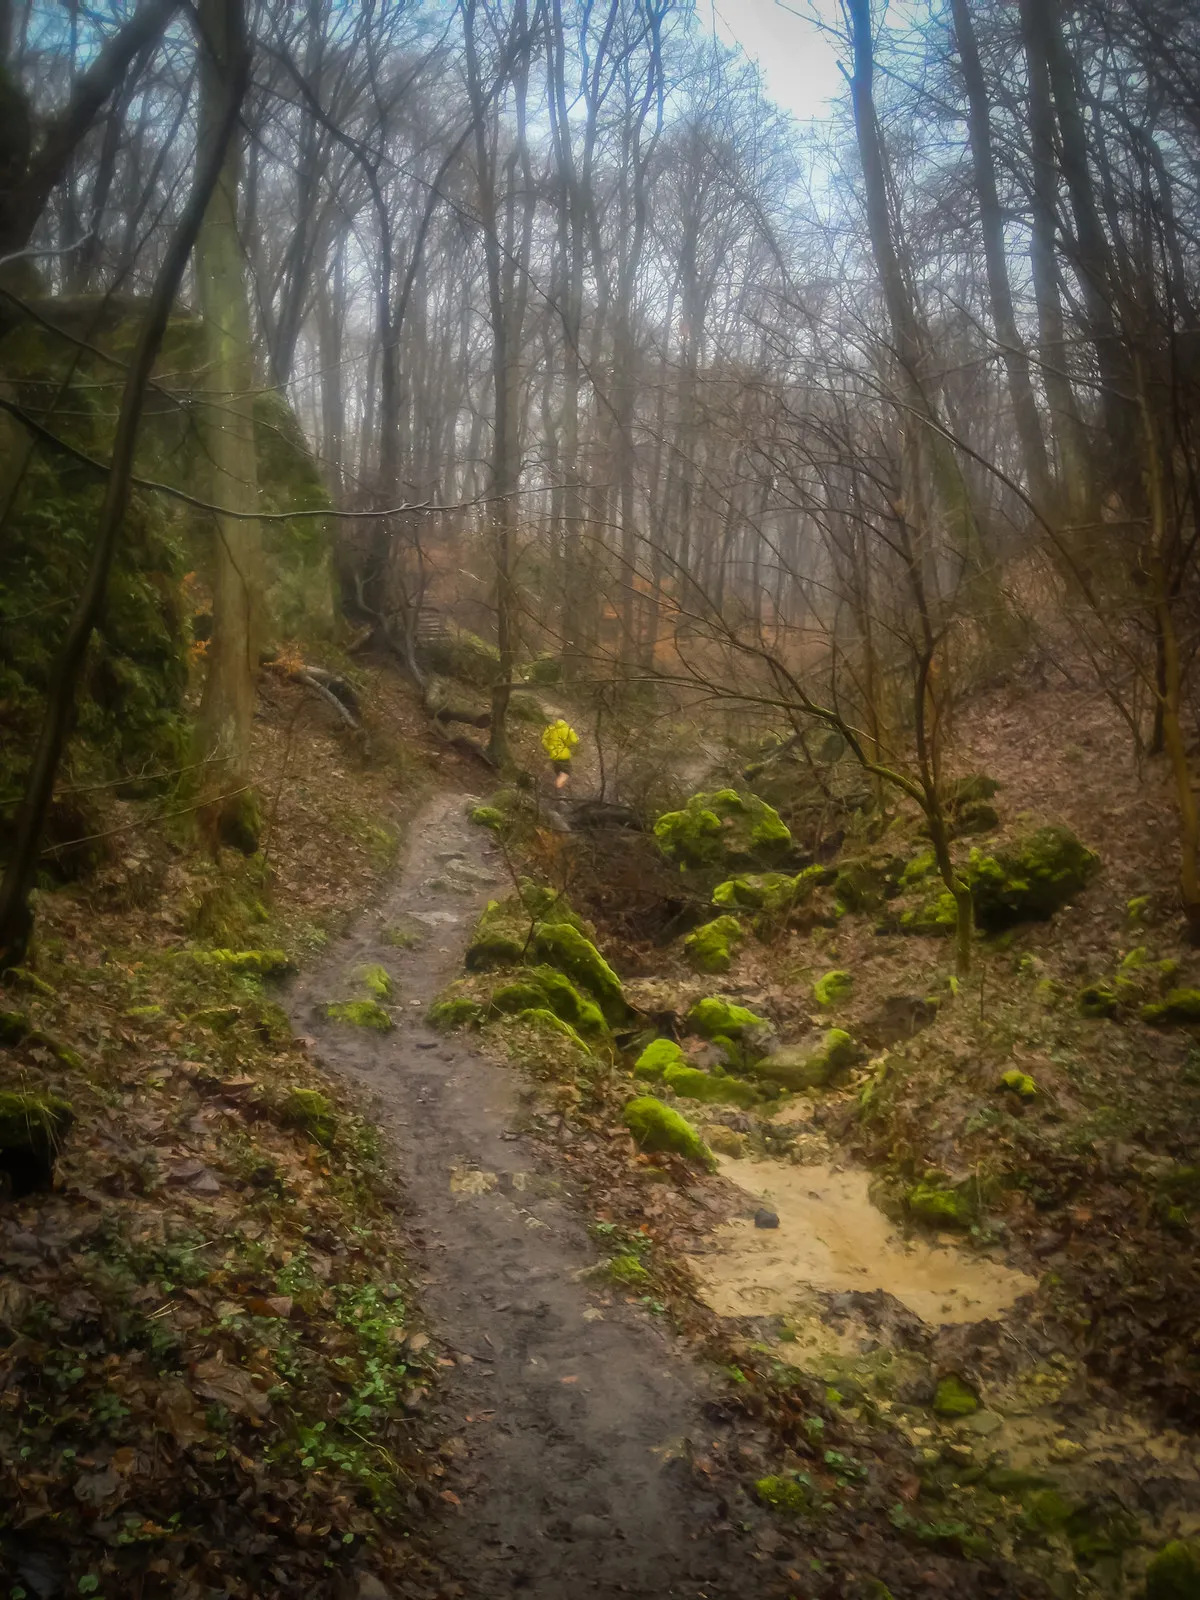 Running up the muddy gorge during damp wather